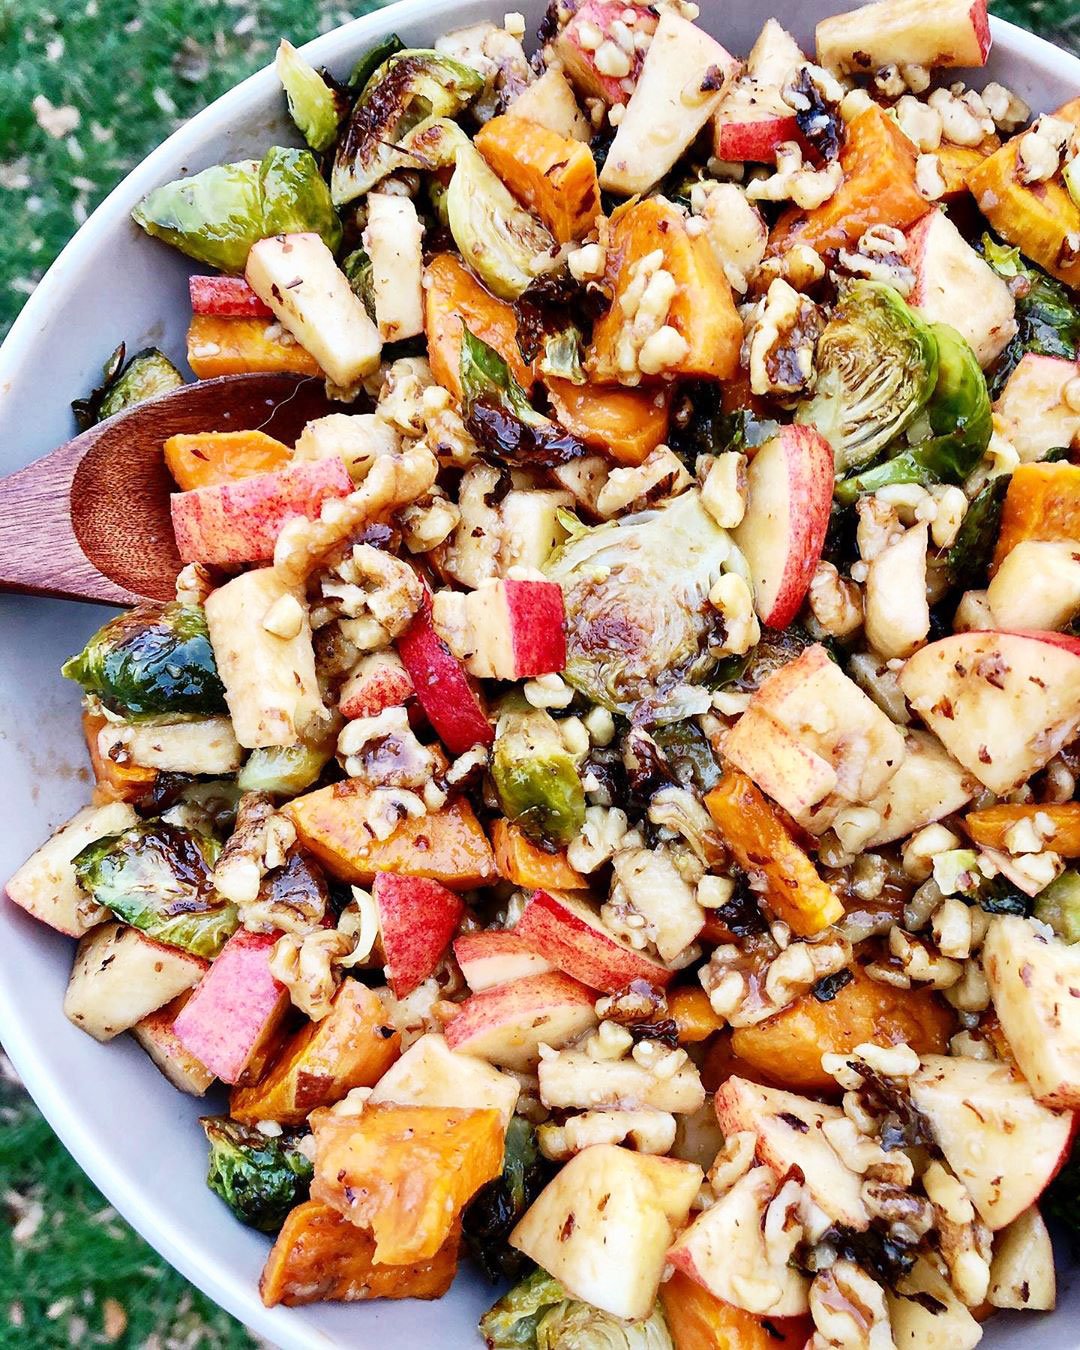 5 Healthy Thanksgiving Vegetable Side Dishes